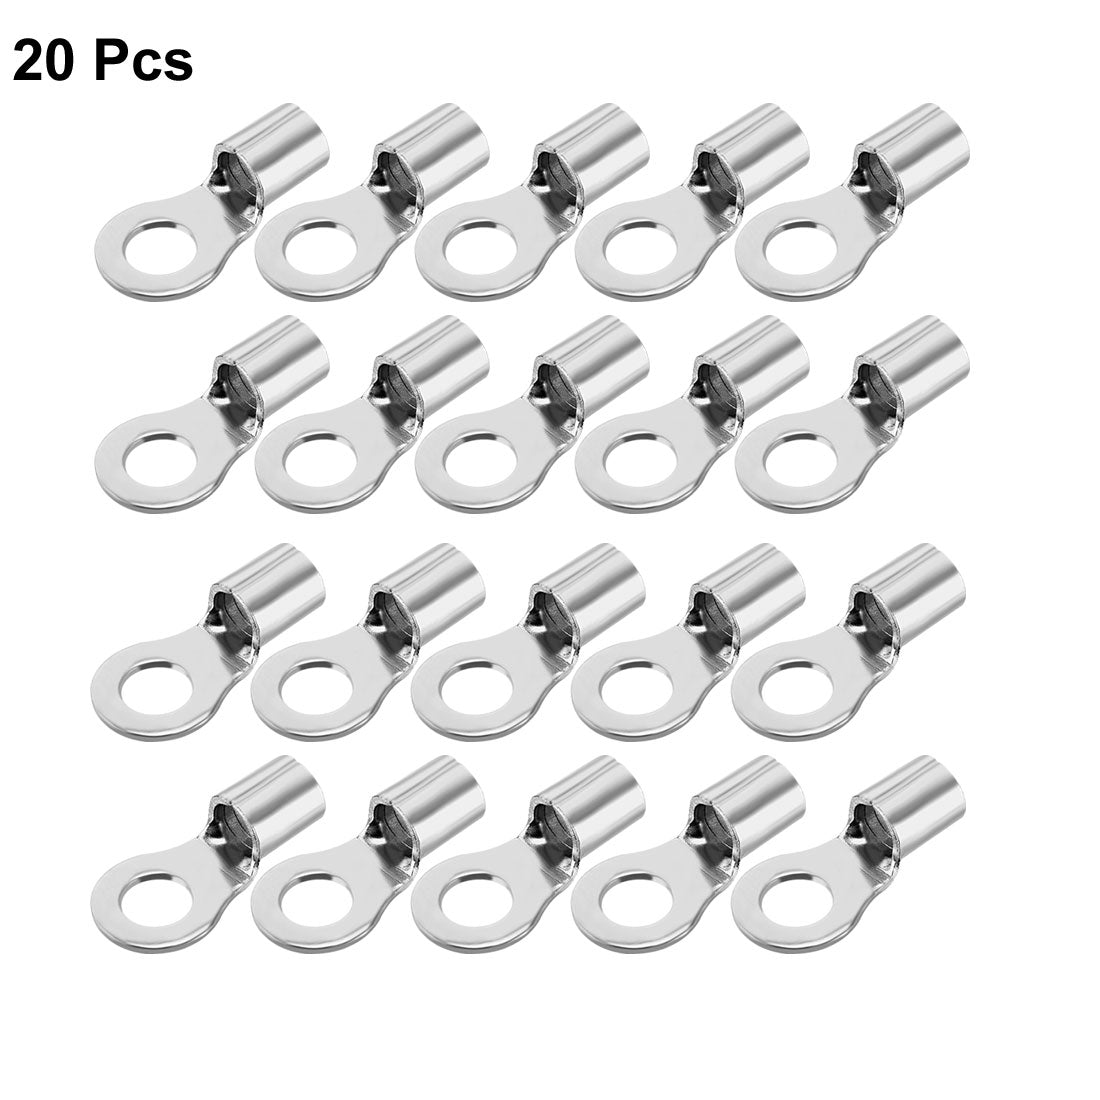 uxcell Uxcell 20Pcs RNB8-6S Non-Insulated U-Type Copper Crimp Terminals 6-10mm2 Wire Connector Silver Tone